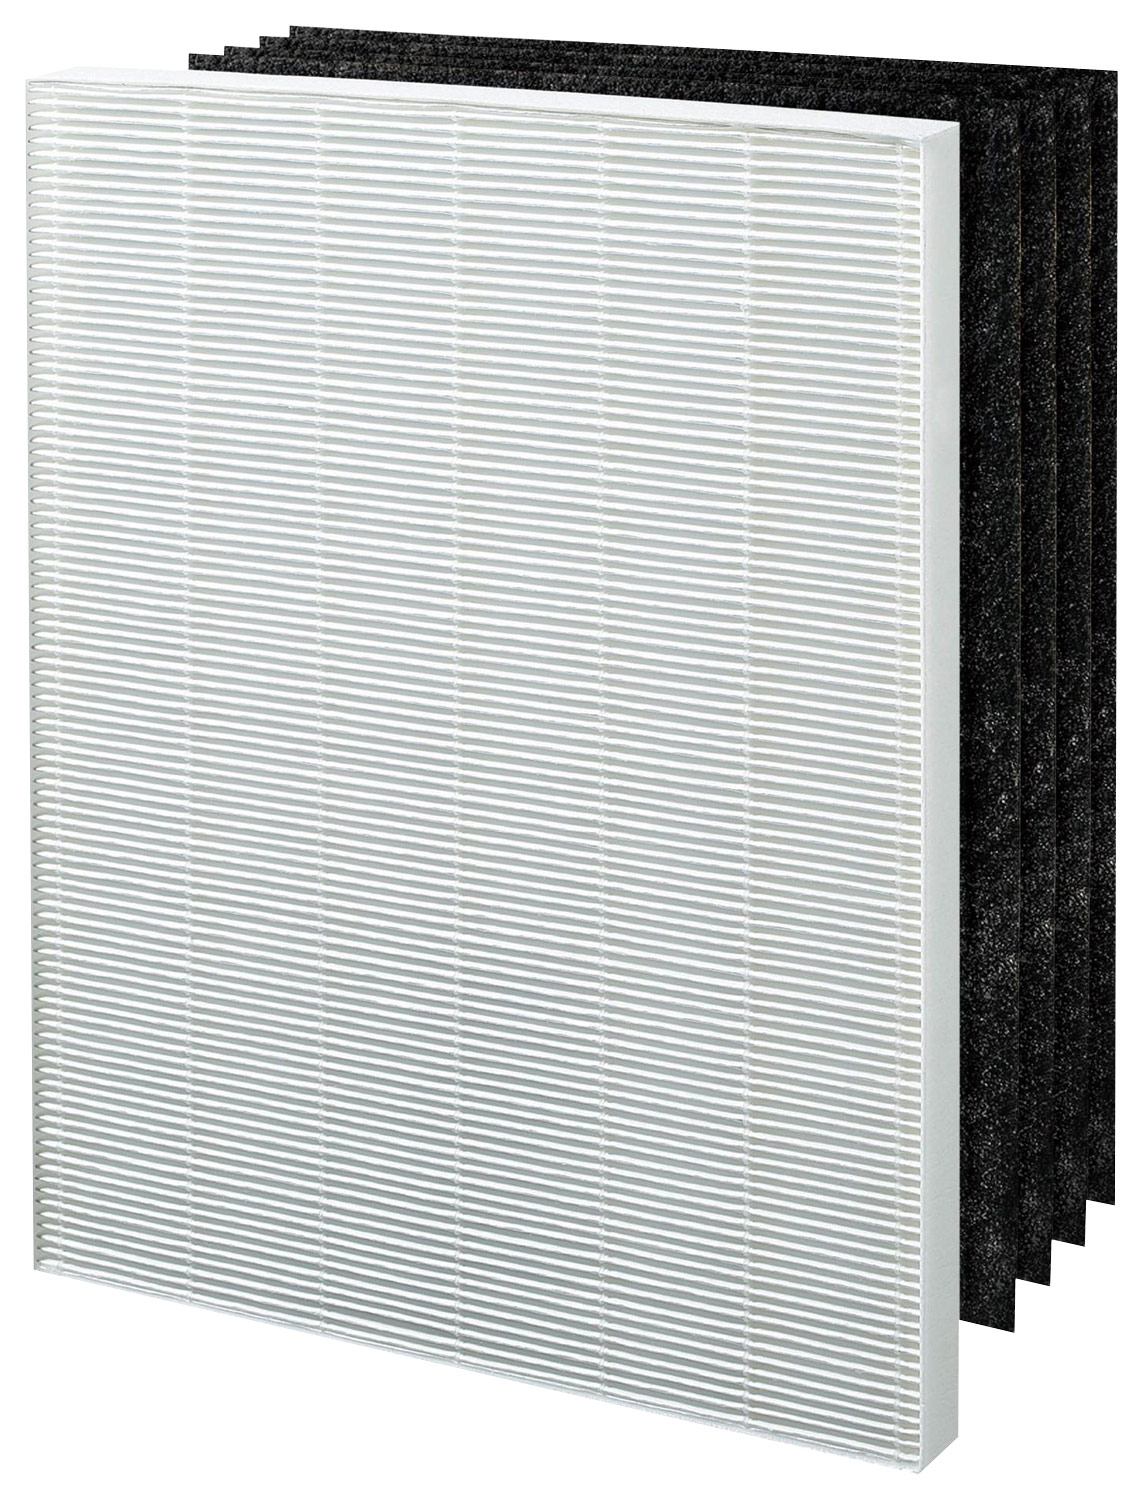 Replacement Filter Set for Winix P300, 5300, 5500 and 6300 Air Cleaners - Black/White